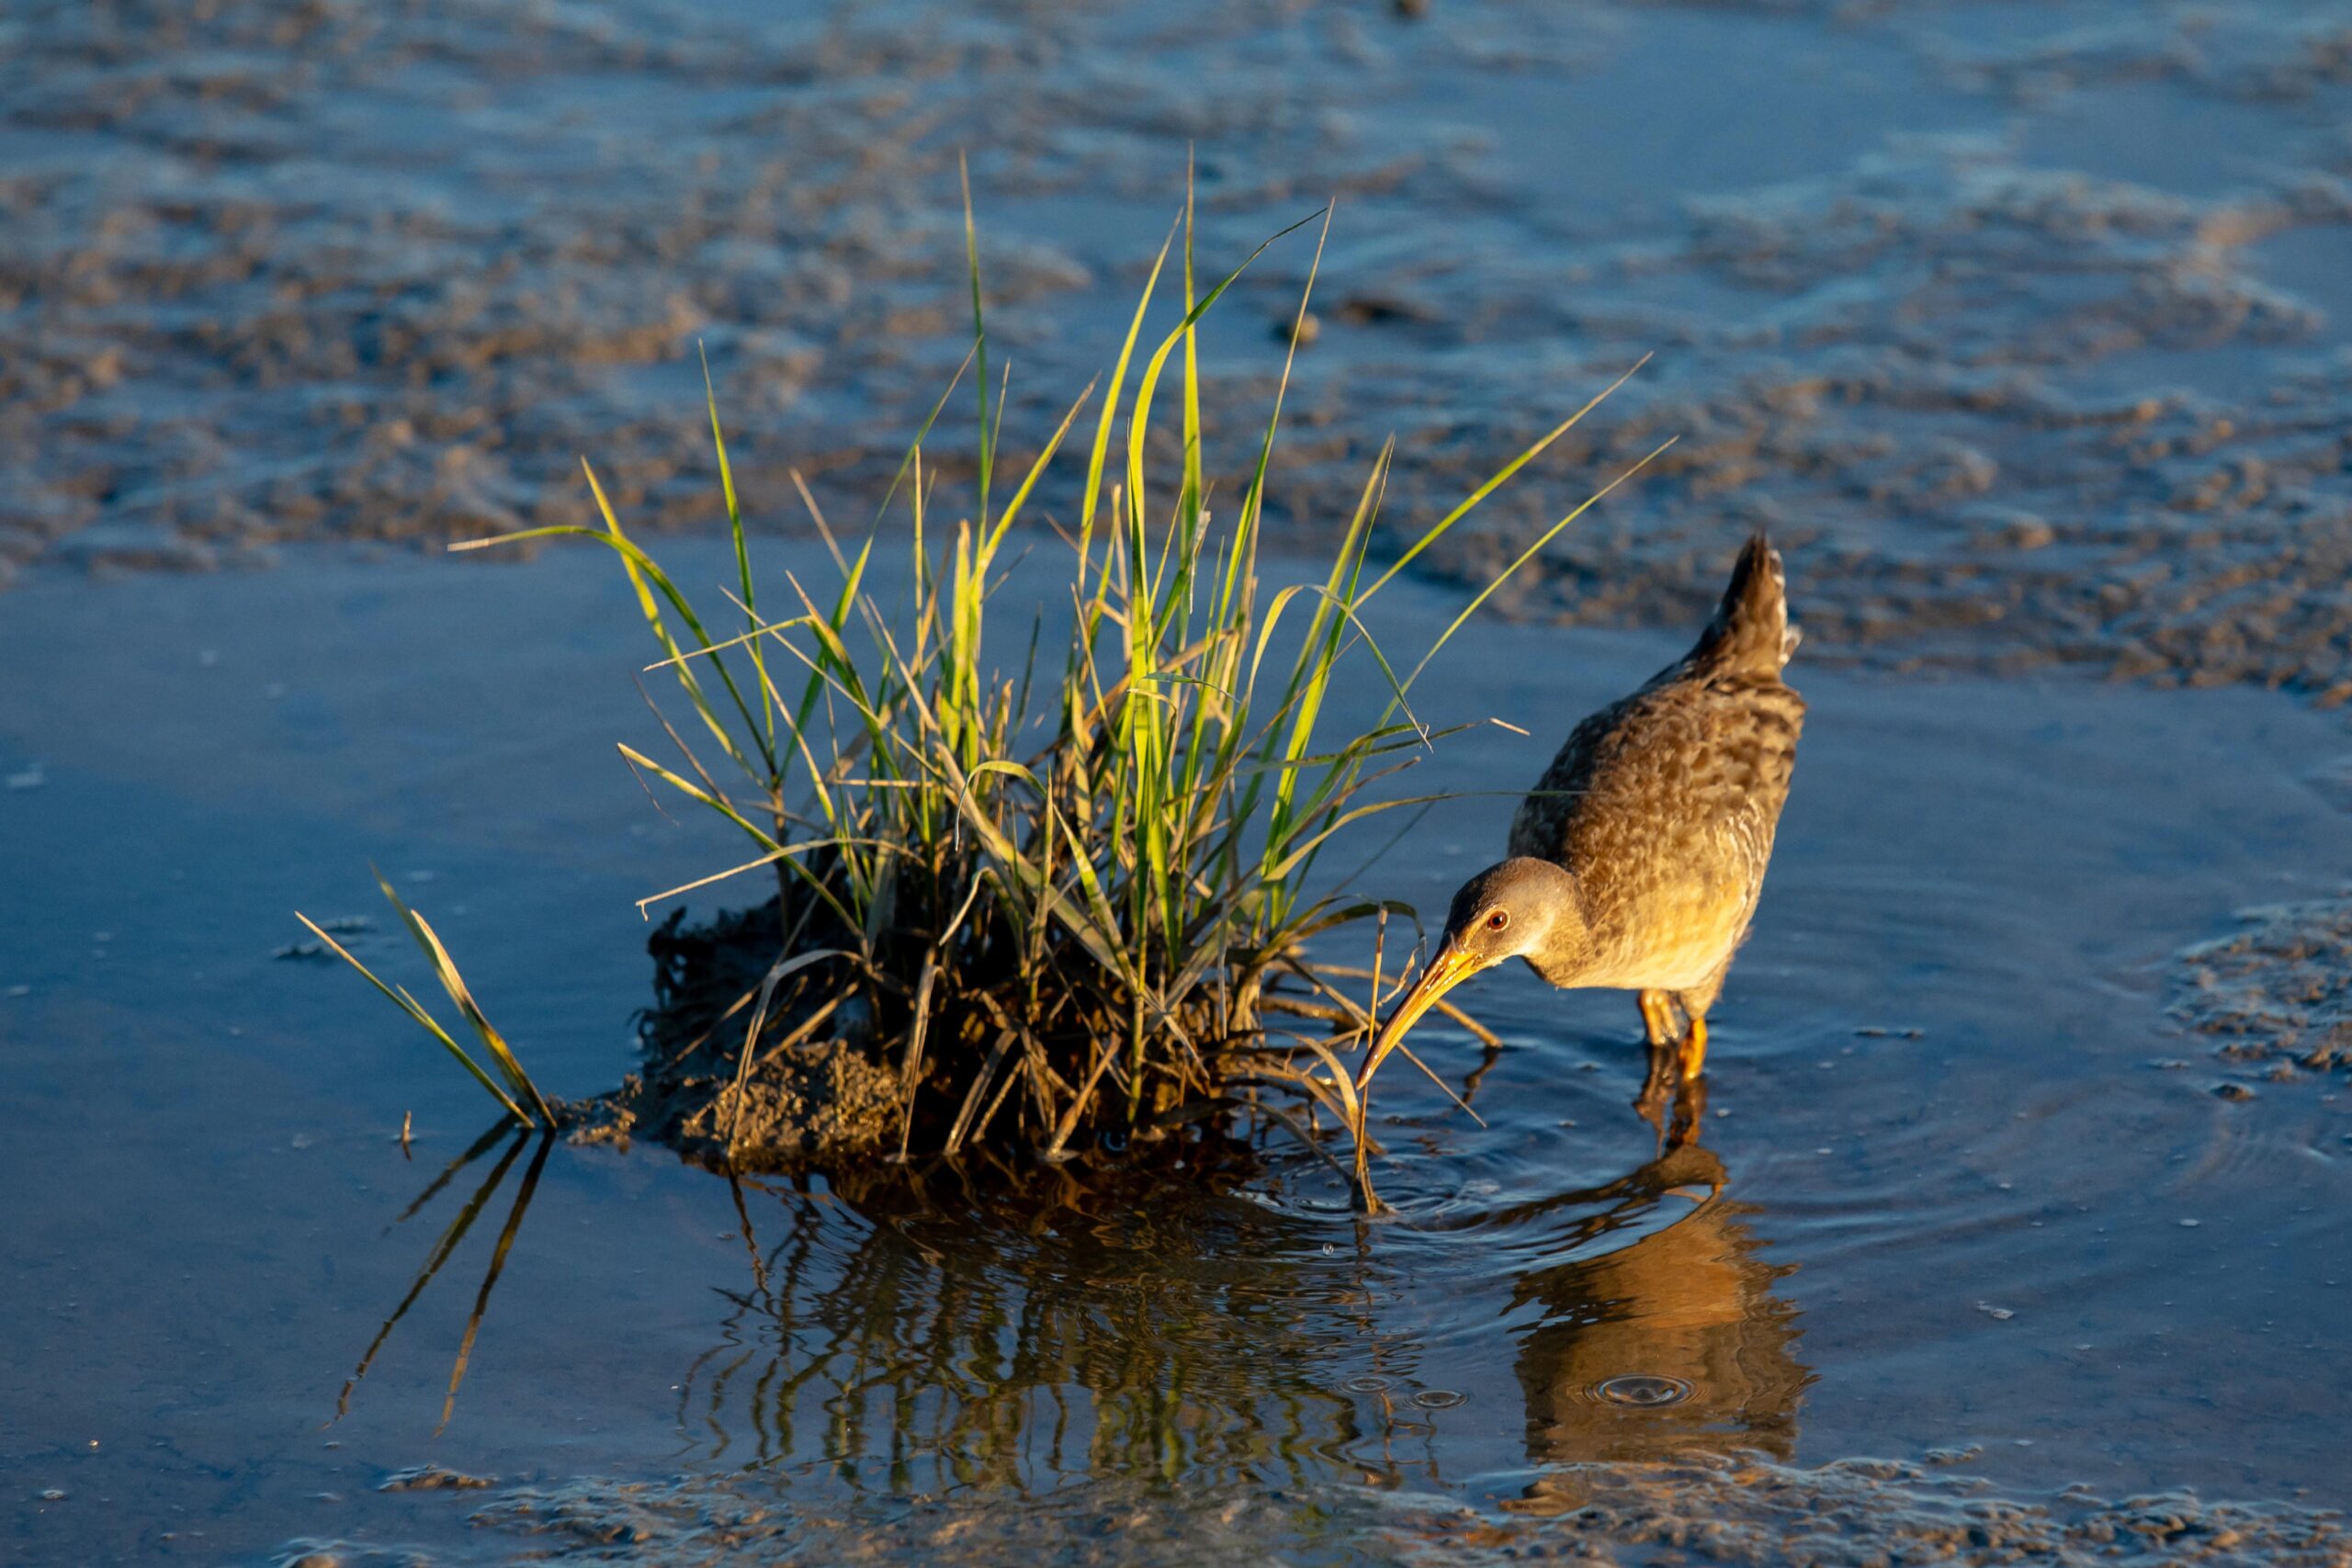 A Virginia Clapper Rail searches for food in the marshes | VPM COM